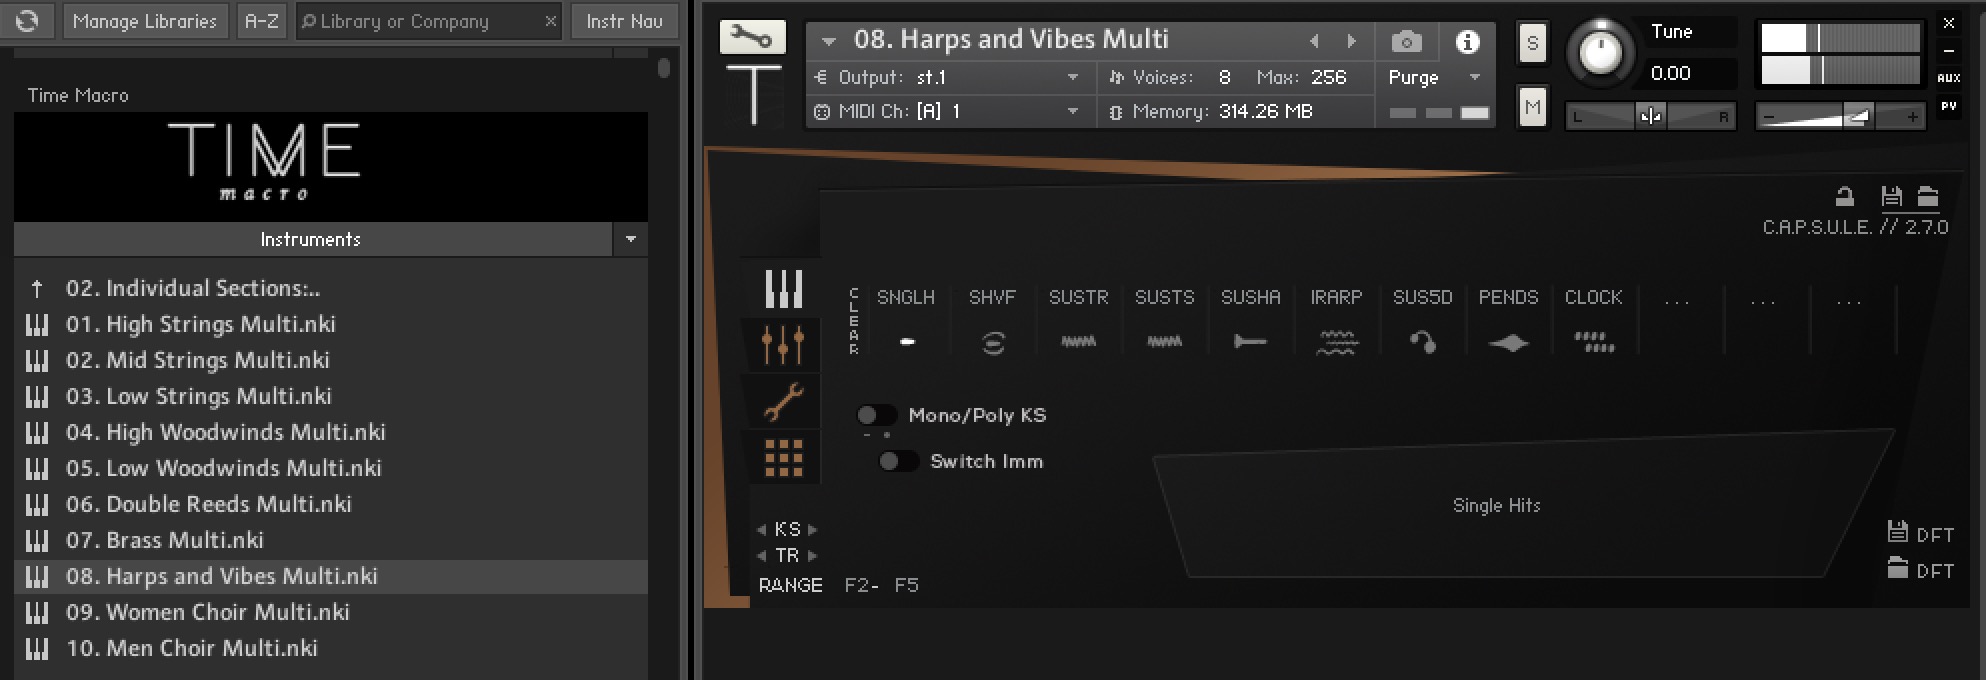 TIME macro by Orchestral Tools Review Harps and Vibes